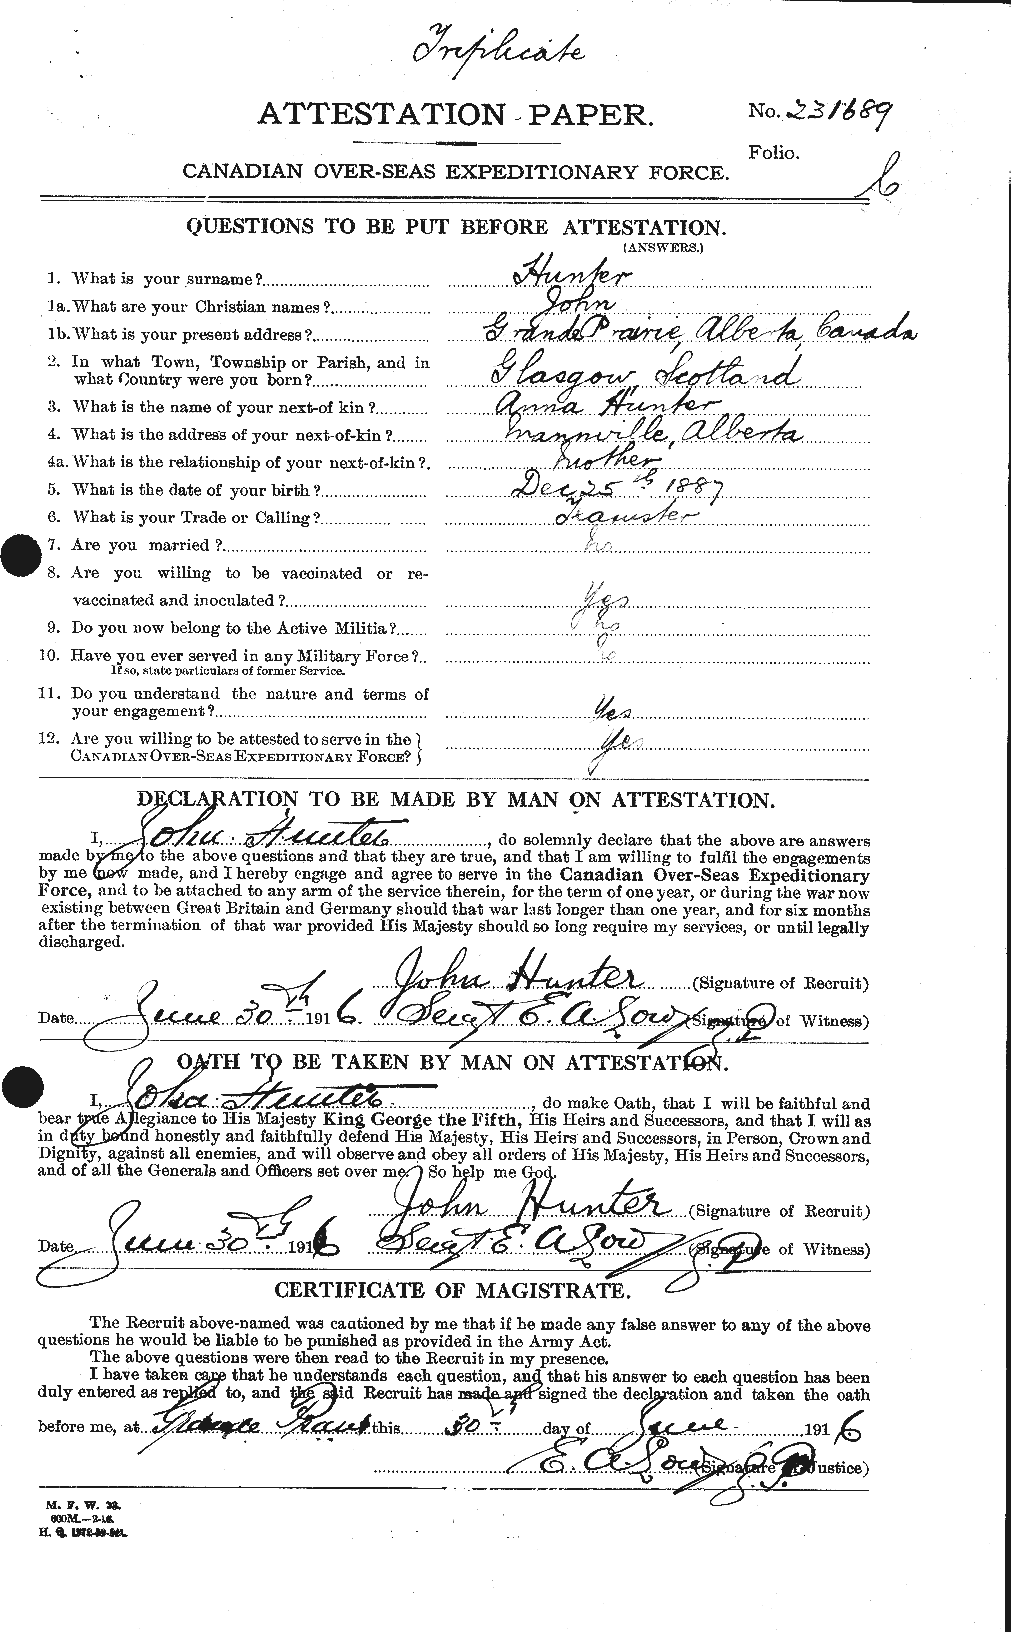 Personnel Records of the First World War - CEF 410324a